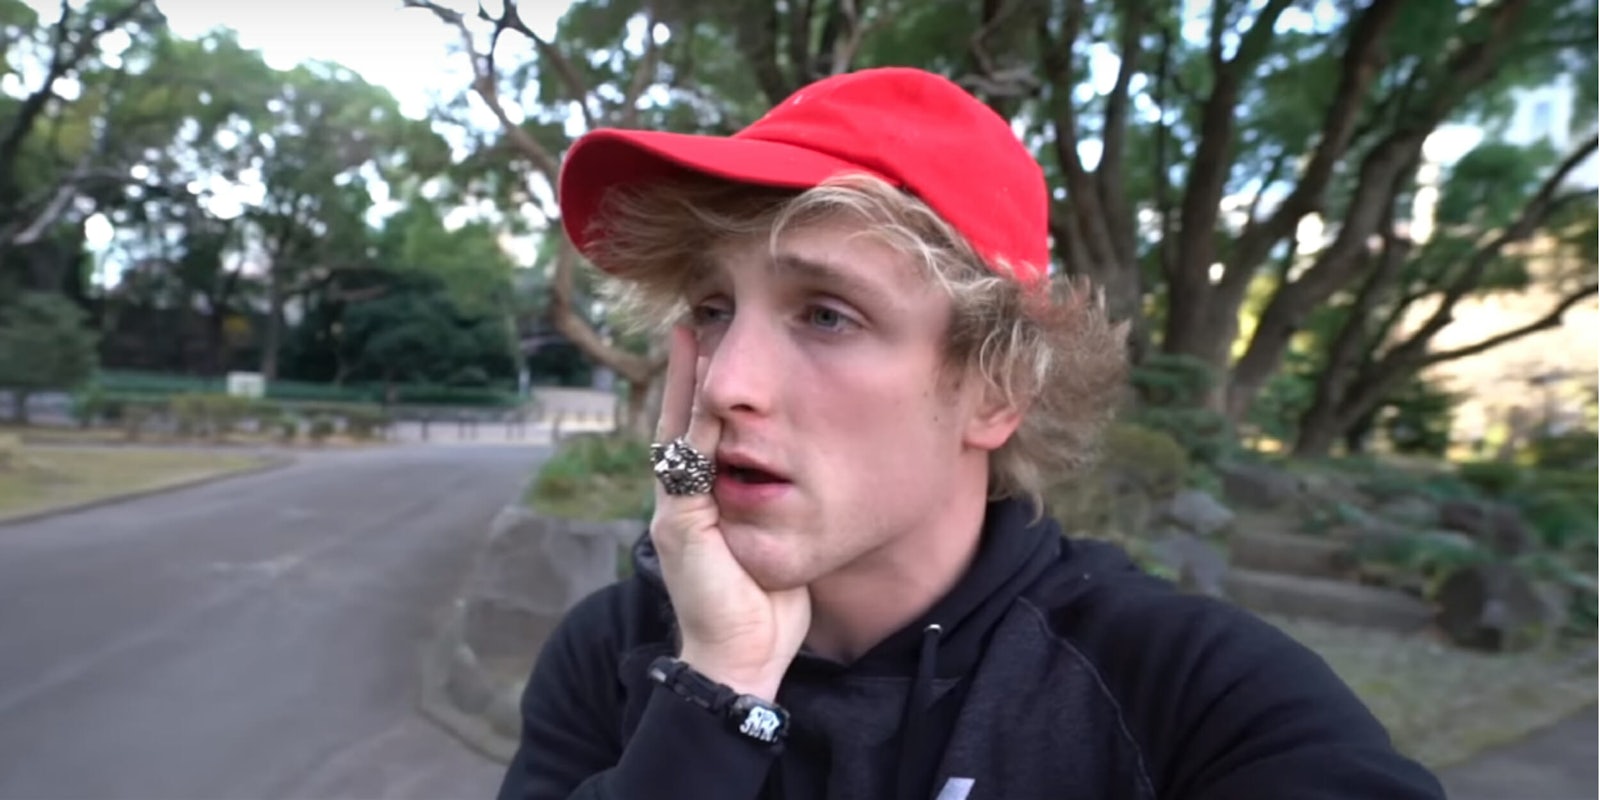 people call for logan paul to be banned from youtube